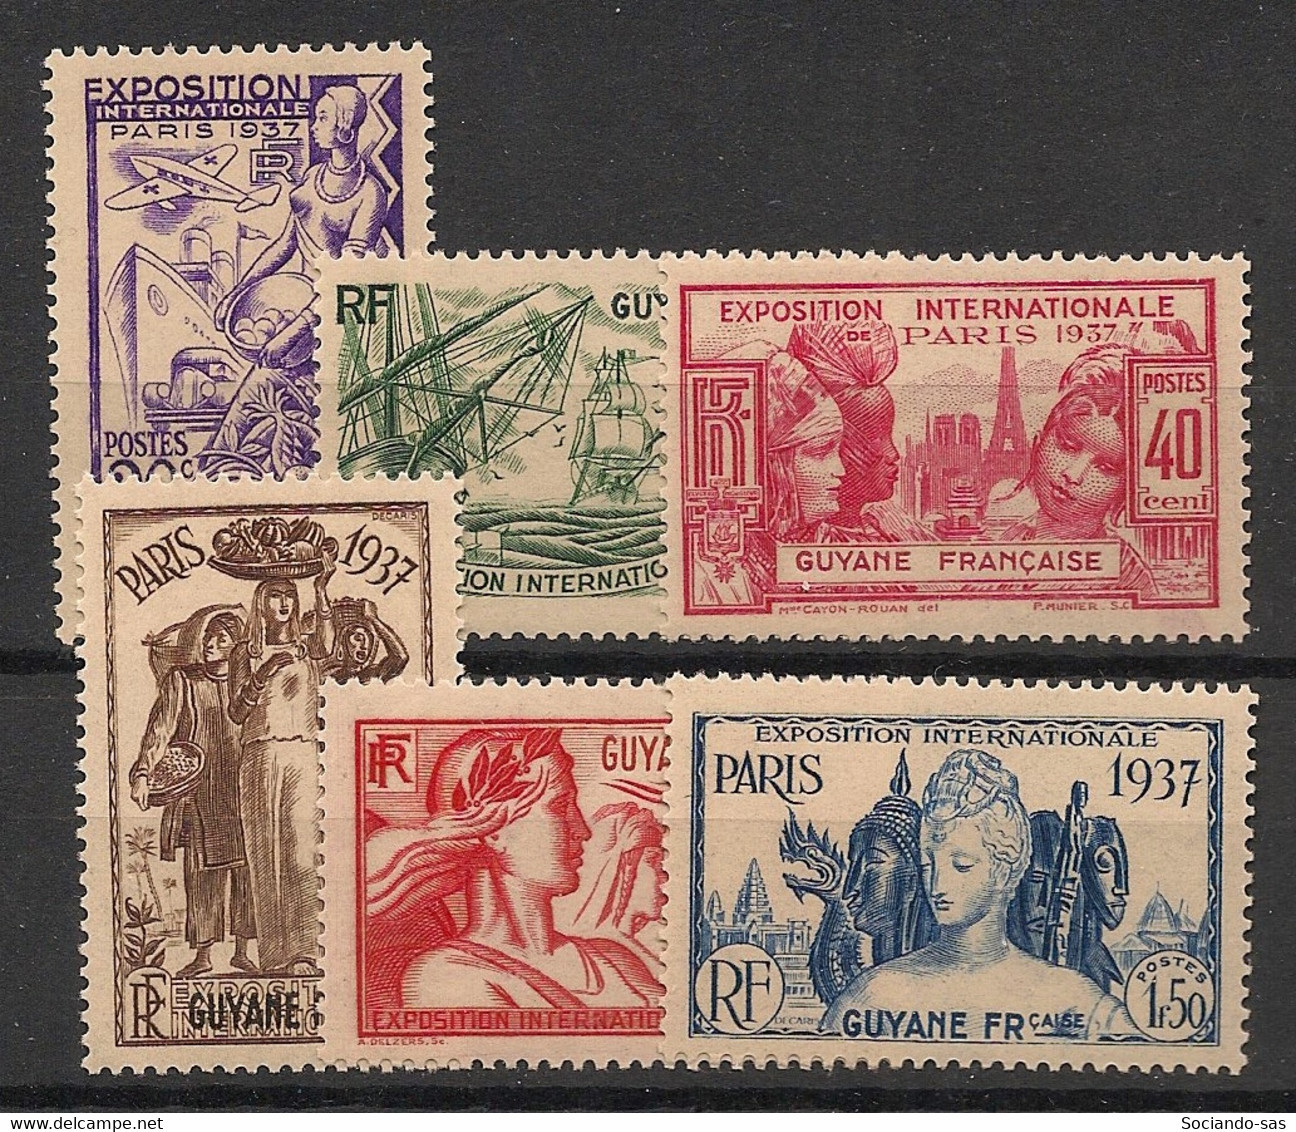 GUYANE - 1937 - N°YT. 143 à 148 - Exposition Internationale - Série Complète - Neuf * / MH VF - Unused Stamps